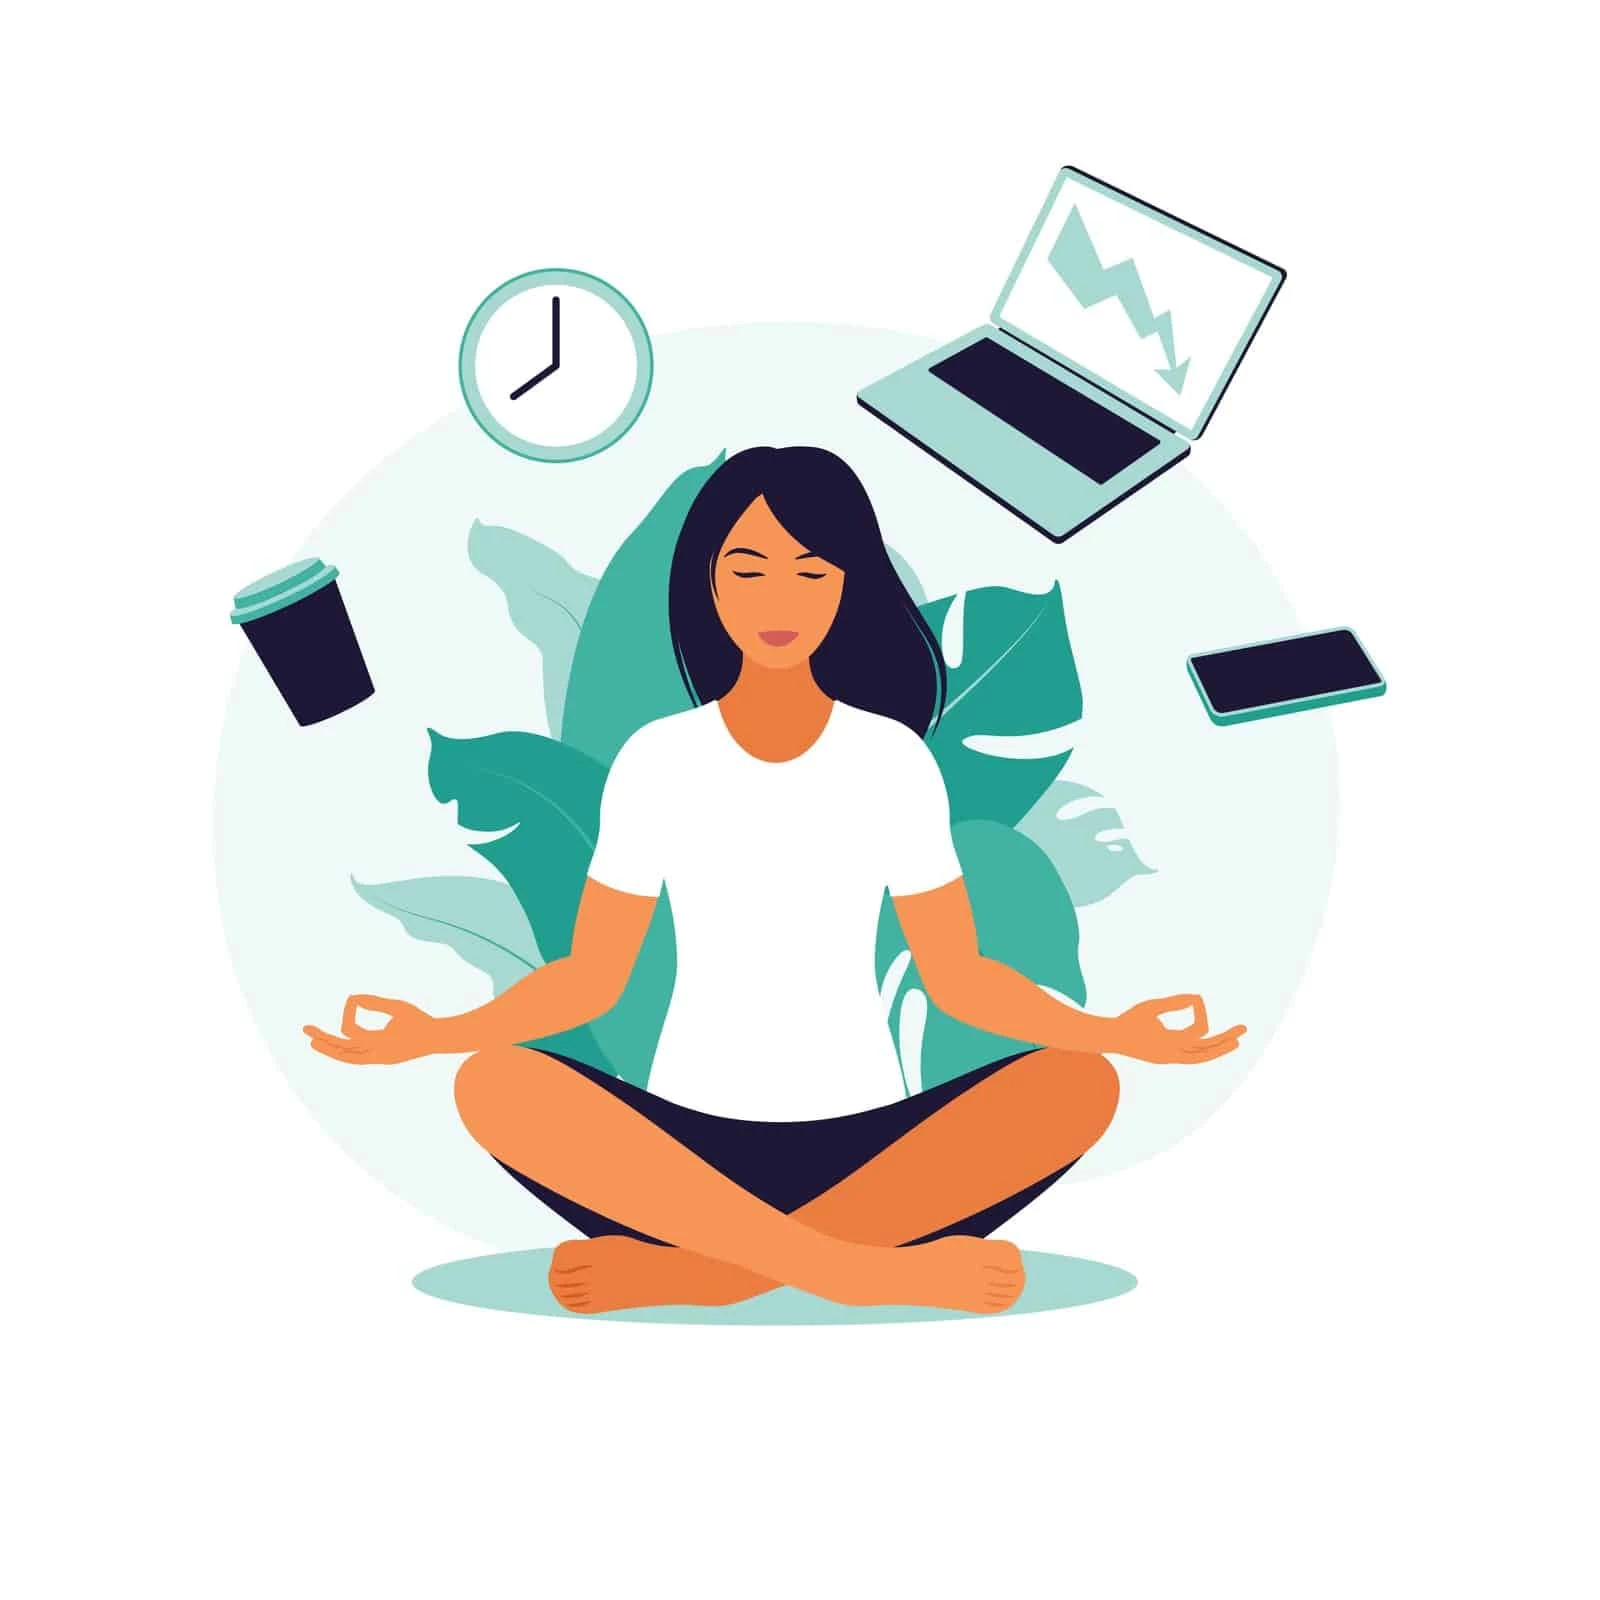 time-management-concept-business-woman-practicing-meditation-and-yoga-with-office-icons in background